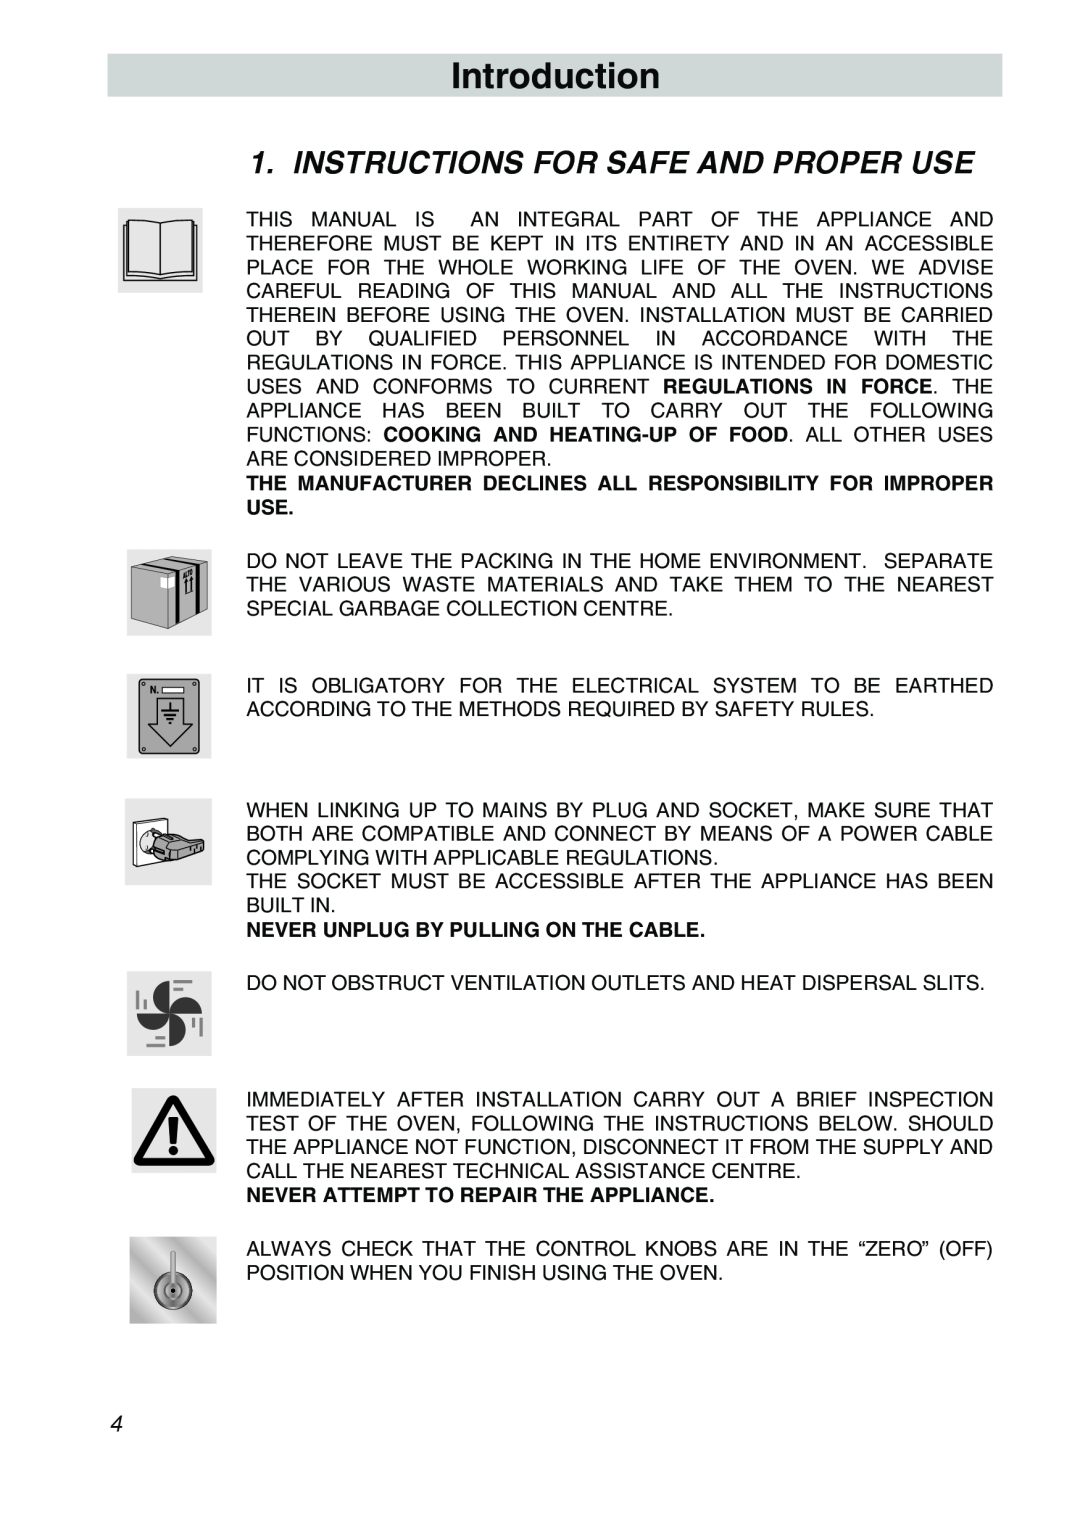 Smeg SCA706X manual Introduction, Instructions For Safe And Proper Use, Never Unplug By Pulling On The Cable 